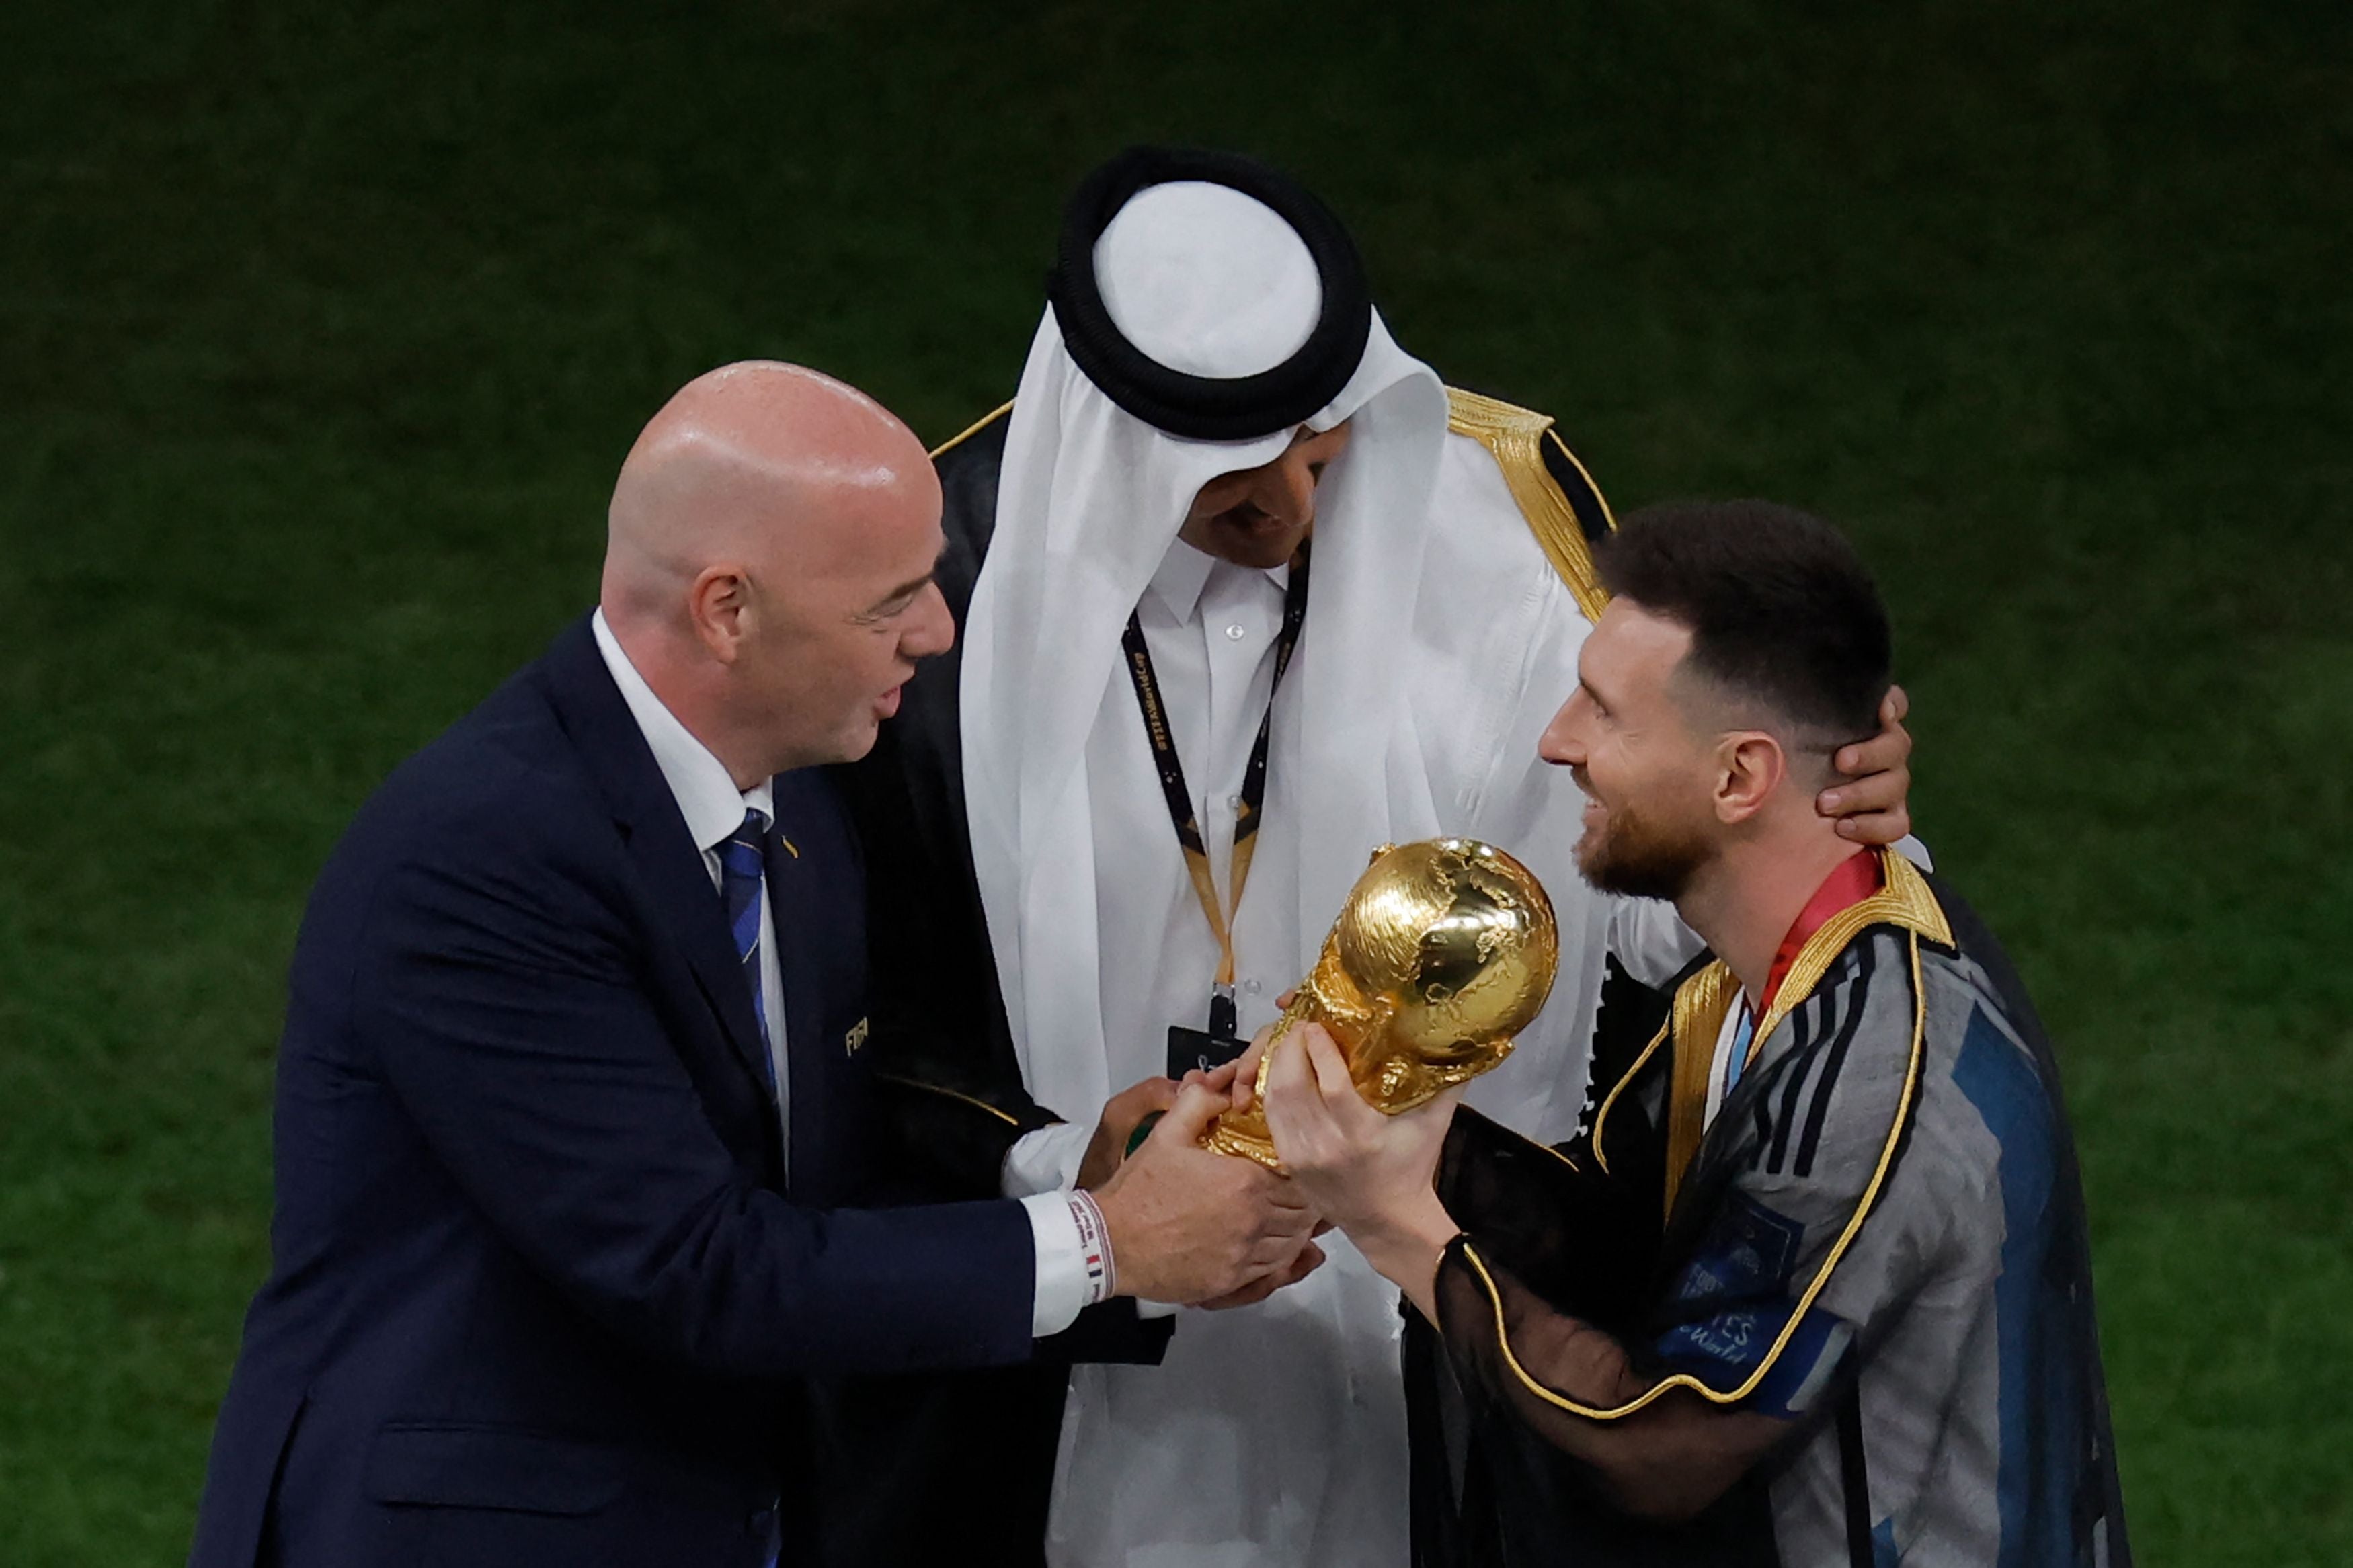 Lionel Messi receives the World Cup trophy from Fifa president Gianni Infantino as Qatar's emir, Sheikh Tamim bin Hamad al-Thani, watches on